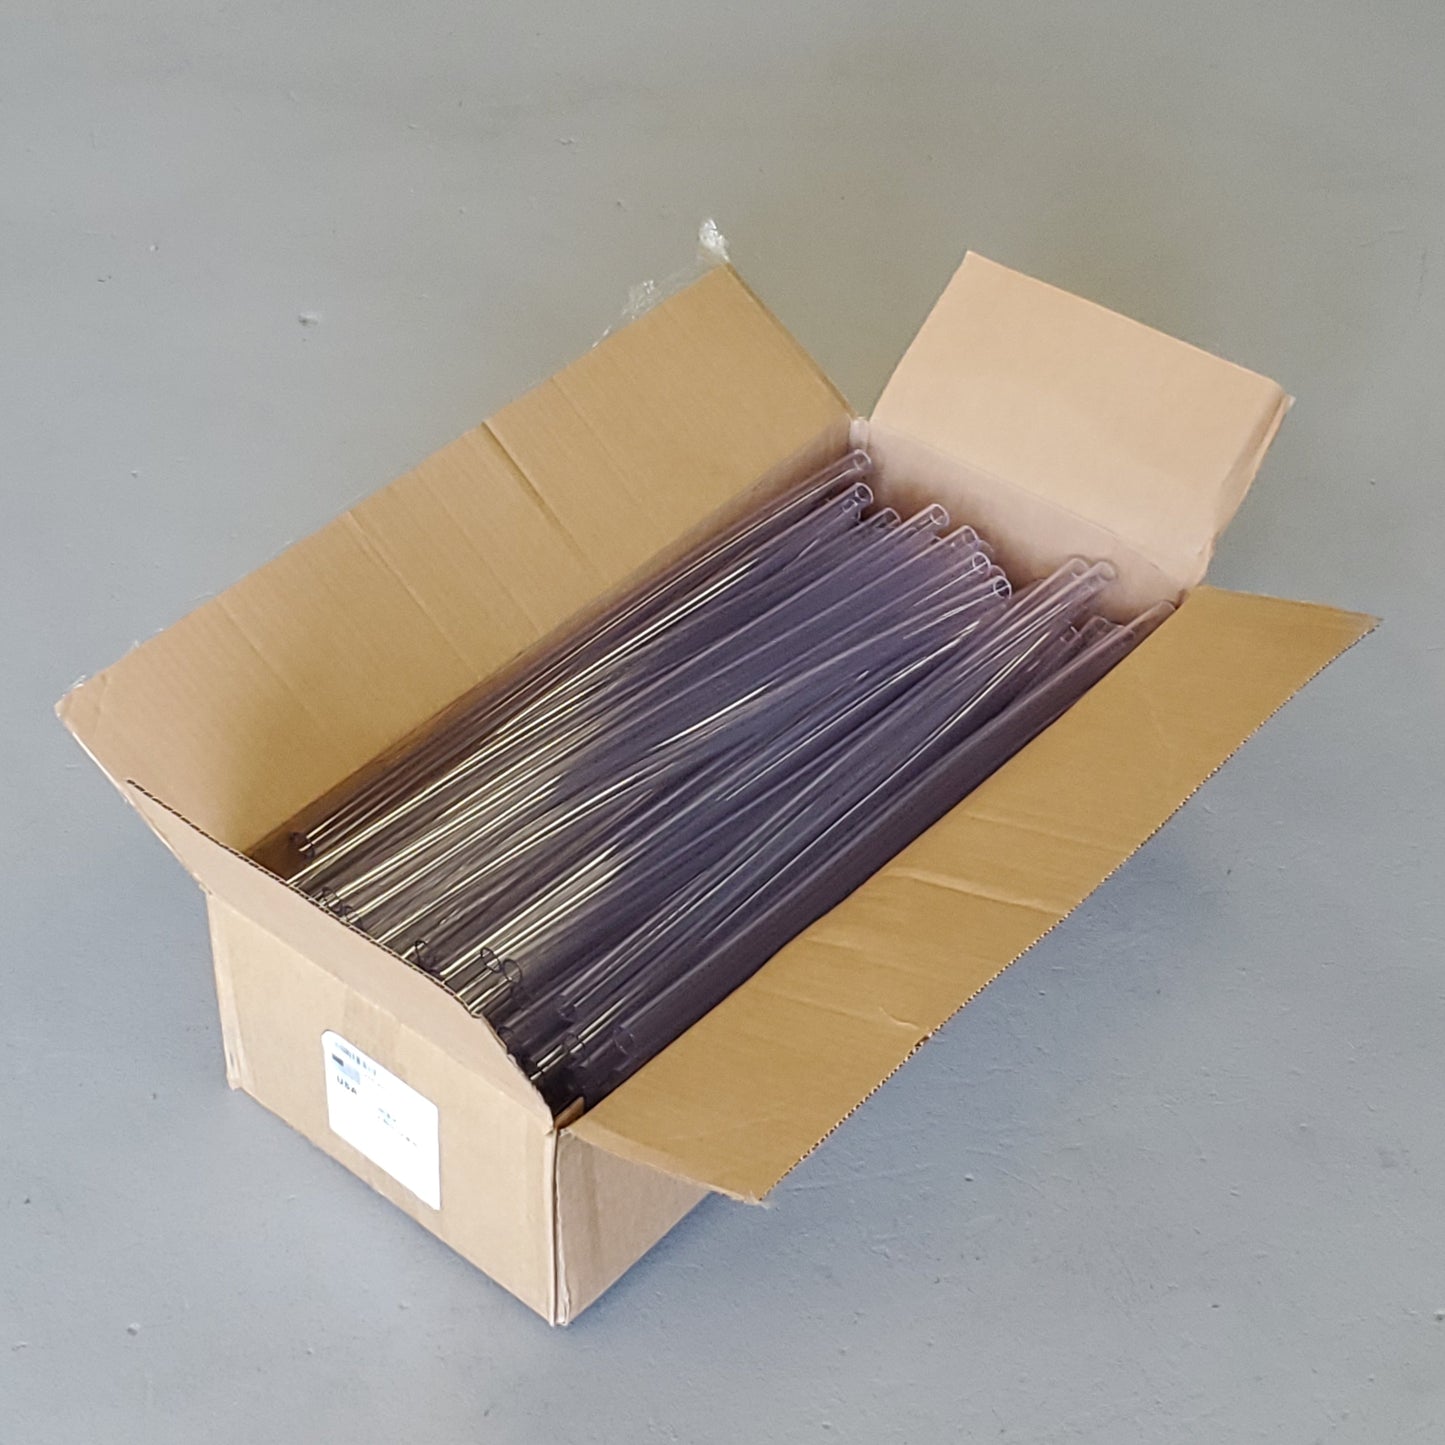 Z@ Case Of 100 PVC Clear Vinyl Tubing / Hoses .625 ID X .812 OD X 24" Long Made In USA (New) F